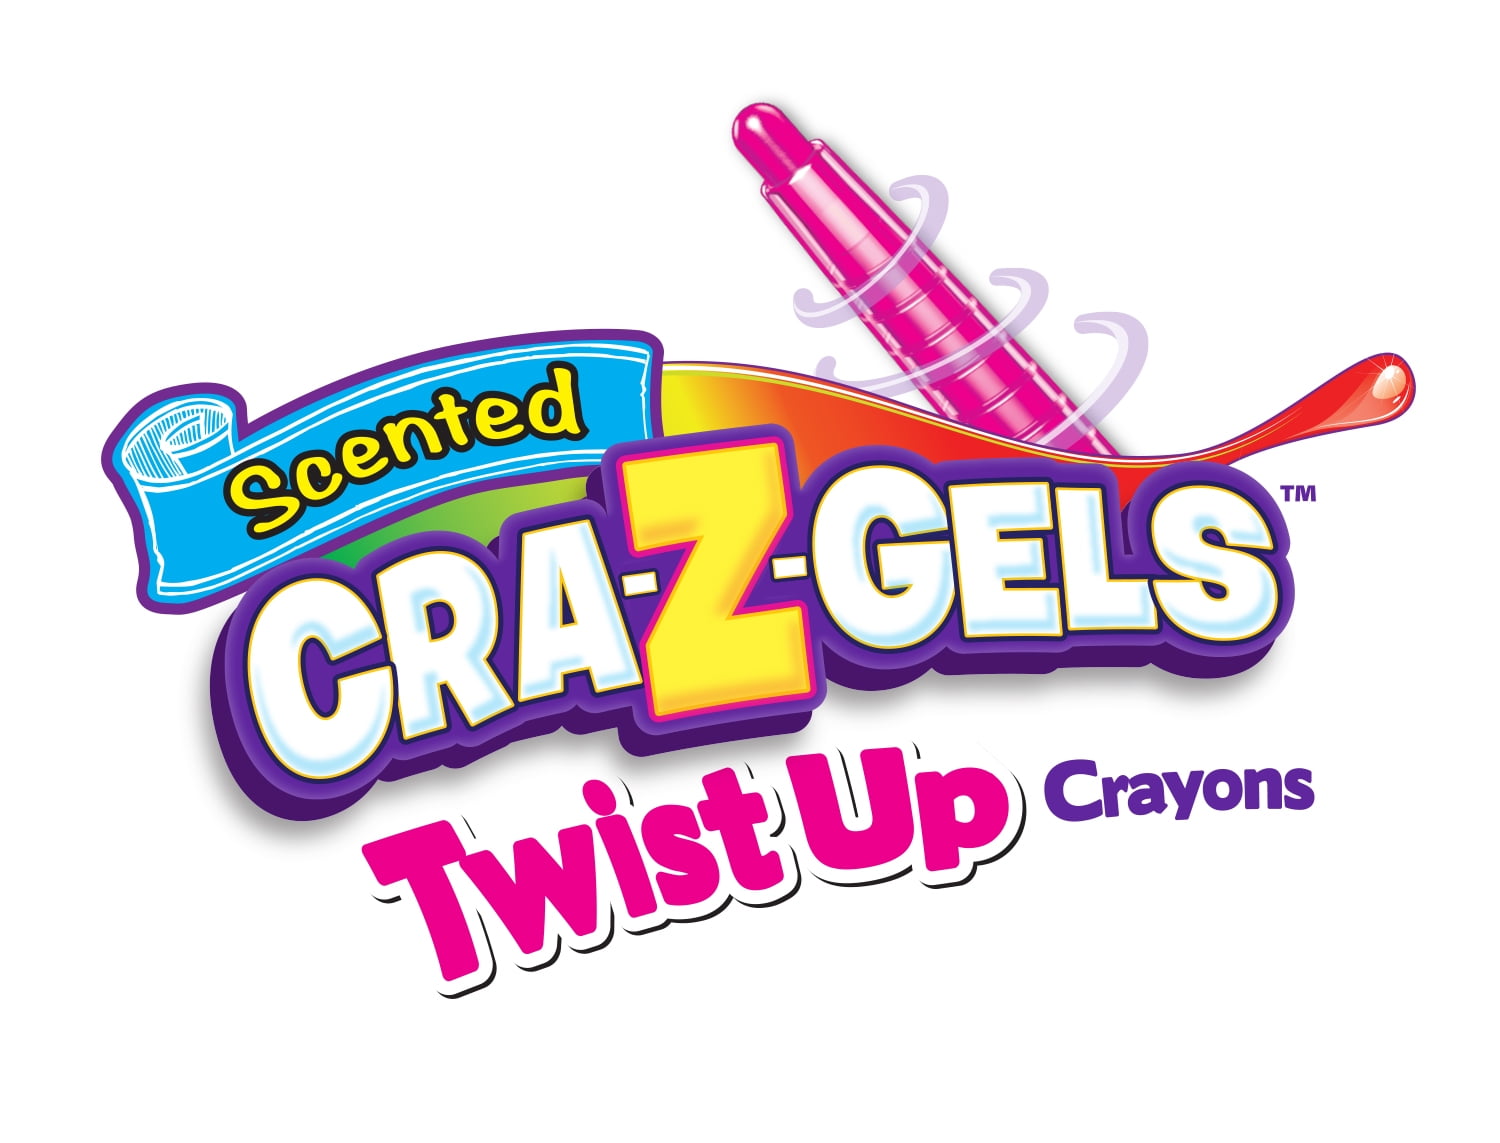 Cra-Z-Art - LOL - sometimes you just have to laugh. Cra-Z-Art Crayons  available at Walmart  #lol #funny #comedy #meme  #humor #artproducts #crayons #stressrelief #stress #stressmanagement  #CraZArtOfficial #kids #fun #kidscrafts